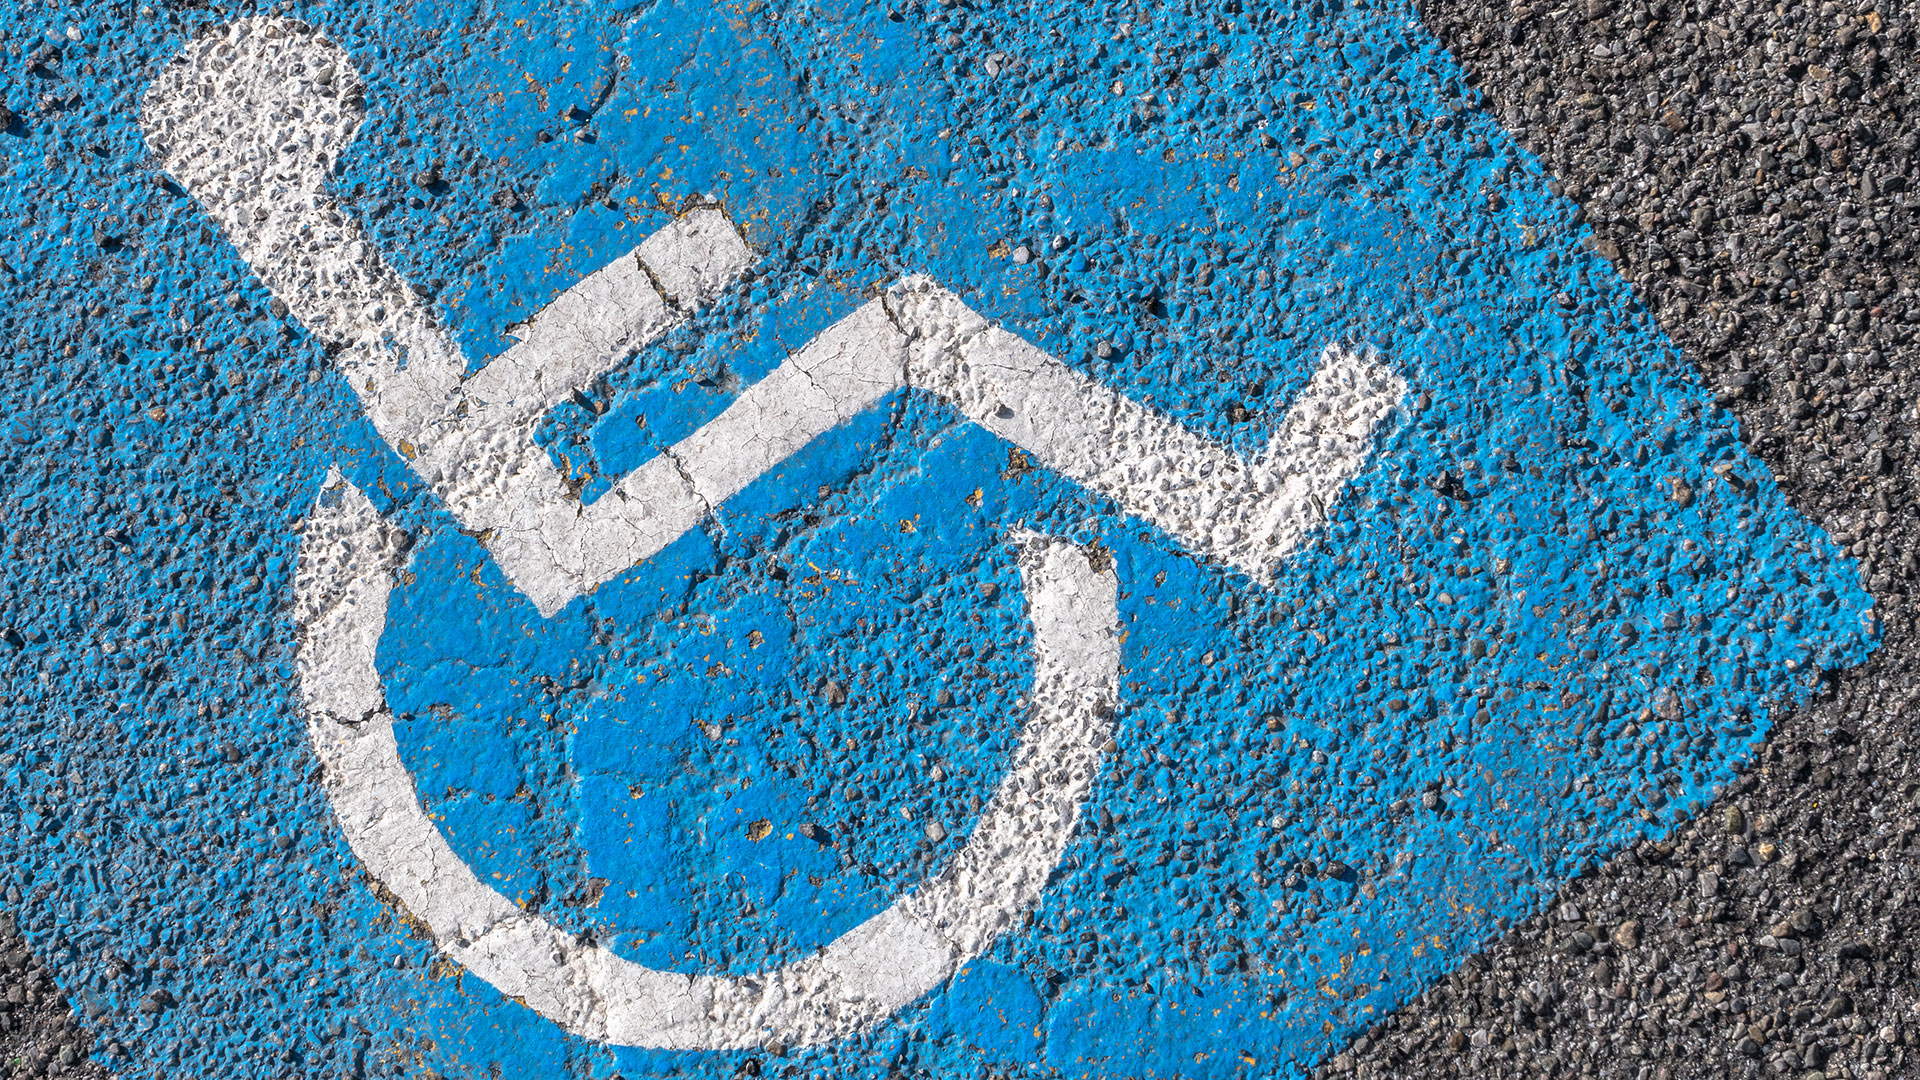 Close-up of disabled parking sign